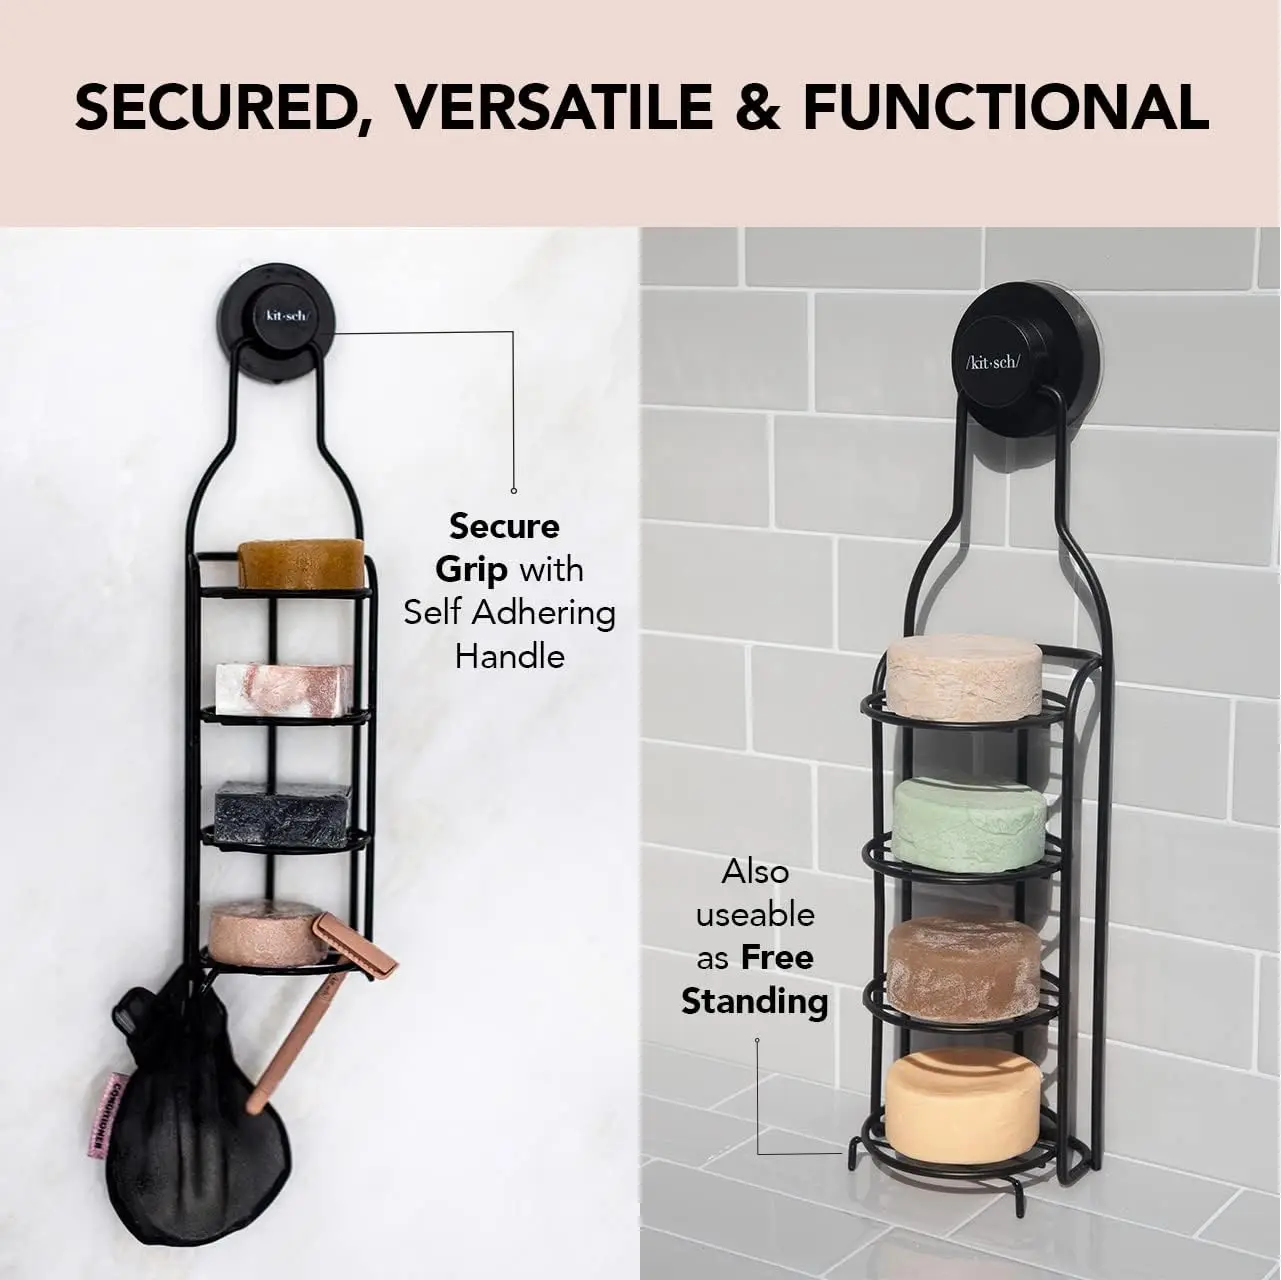 https://ae01.alicdn.com/kf/Sb74323351a1f45989fdc49c13347a6c5G/Kitsch-Stainless-Steel-Shower-Caddy-with-Suction-Cup-Rust-Proof-Bar-Soap-Holder-for-Shower-Wall.jpg